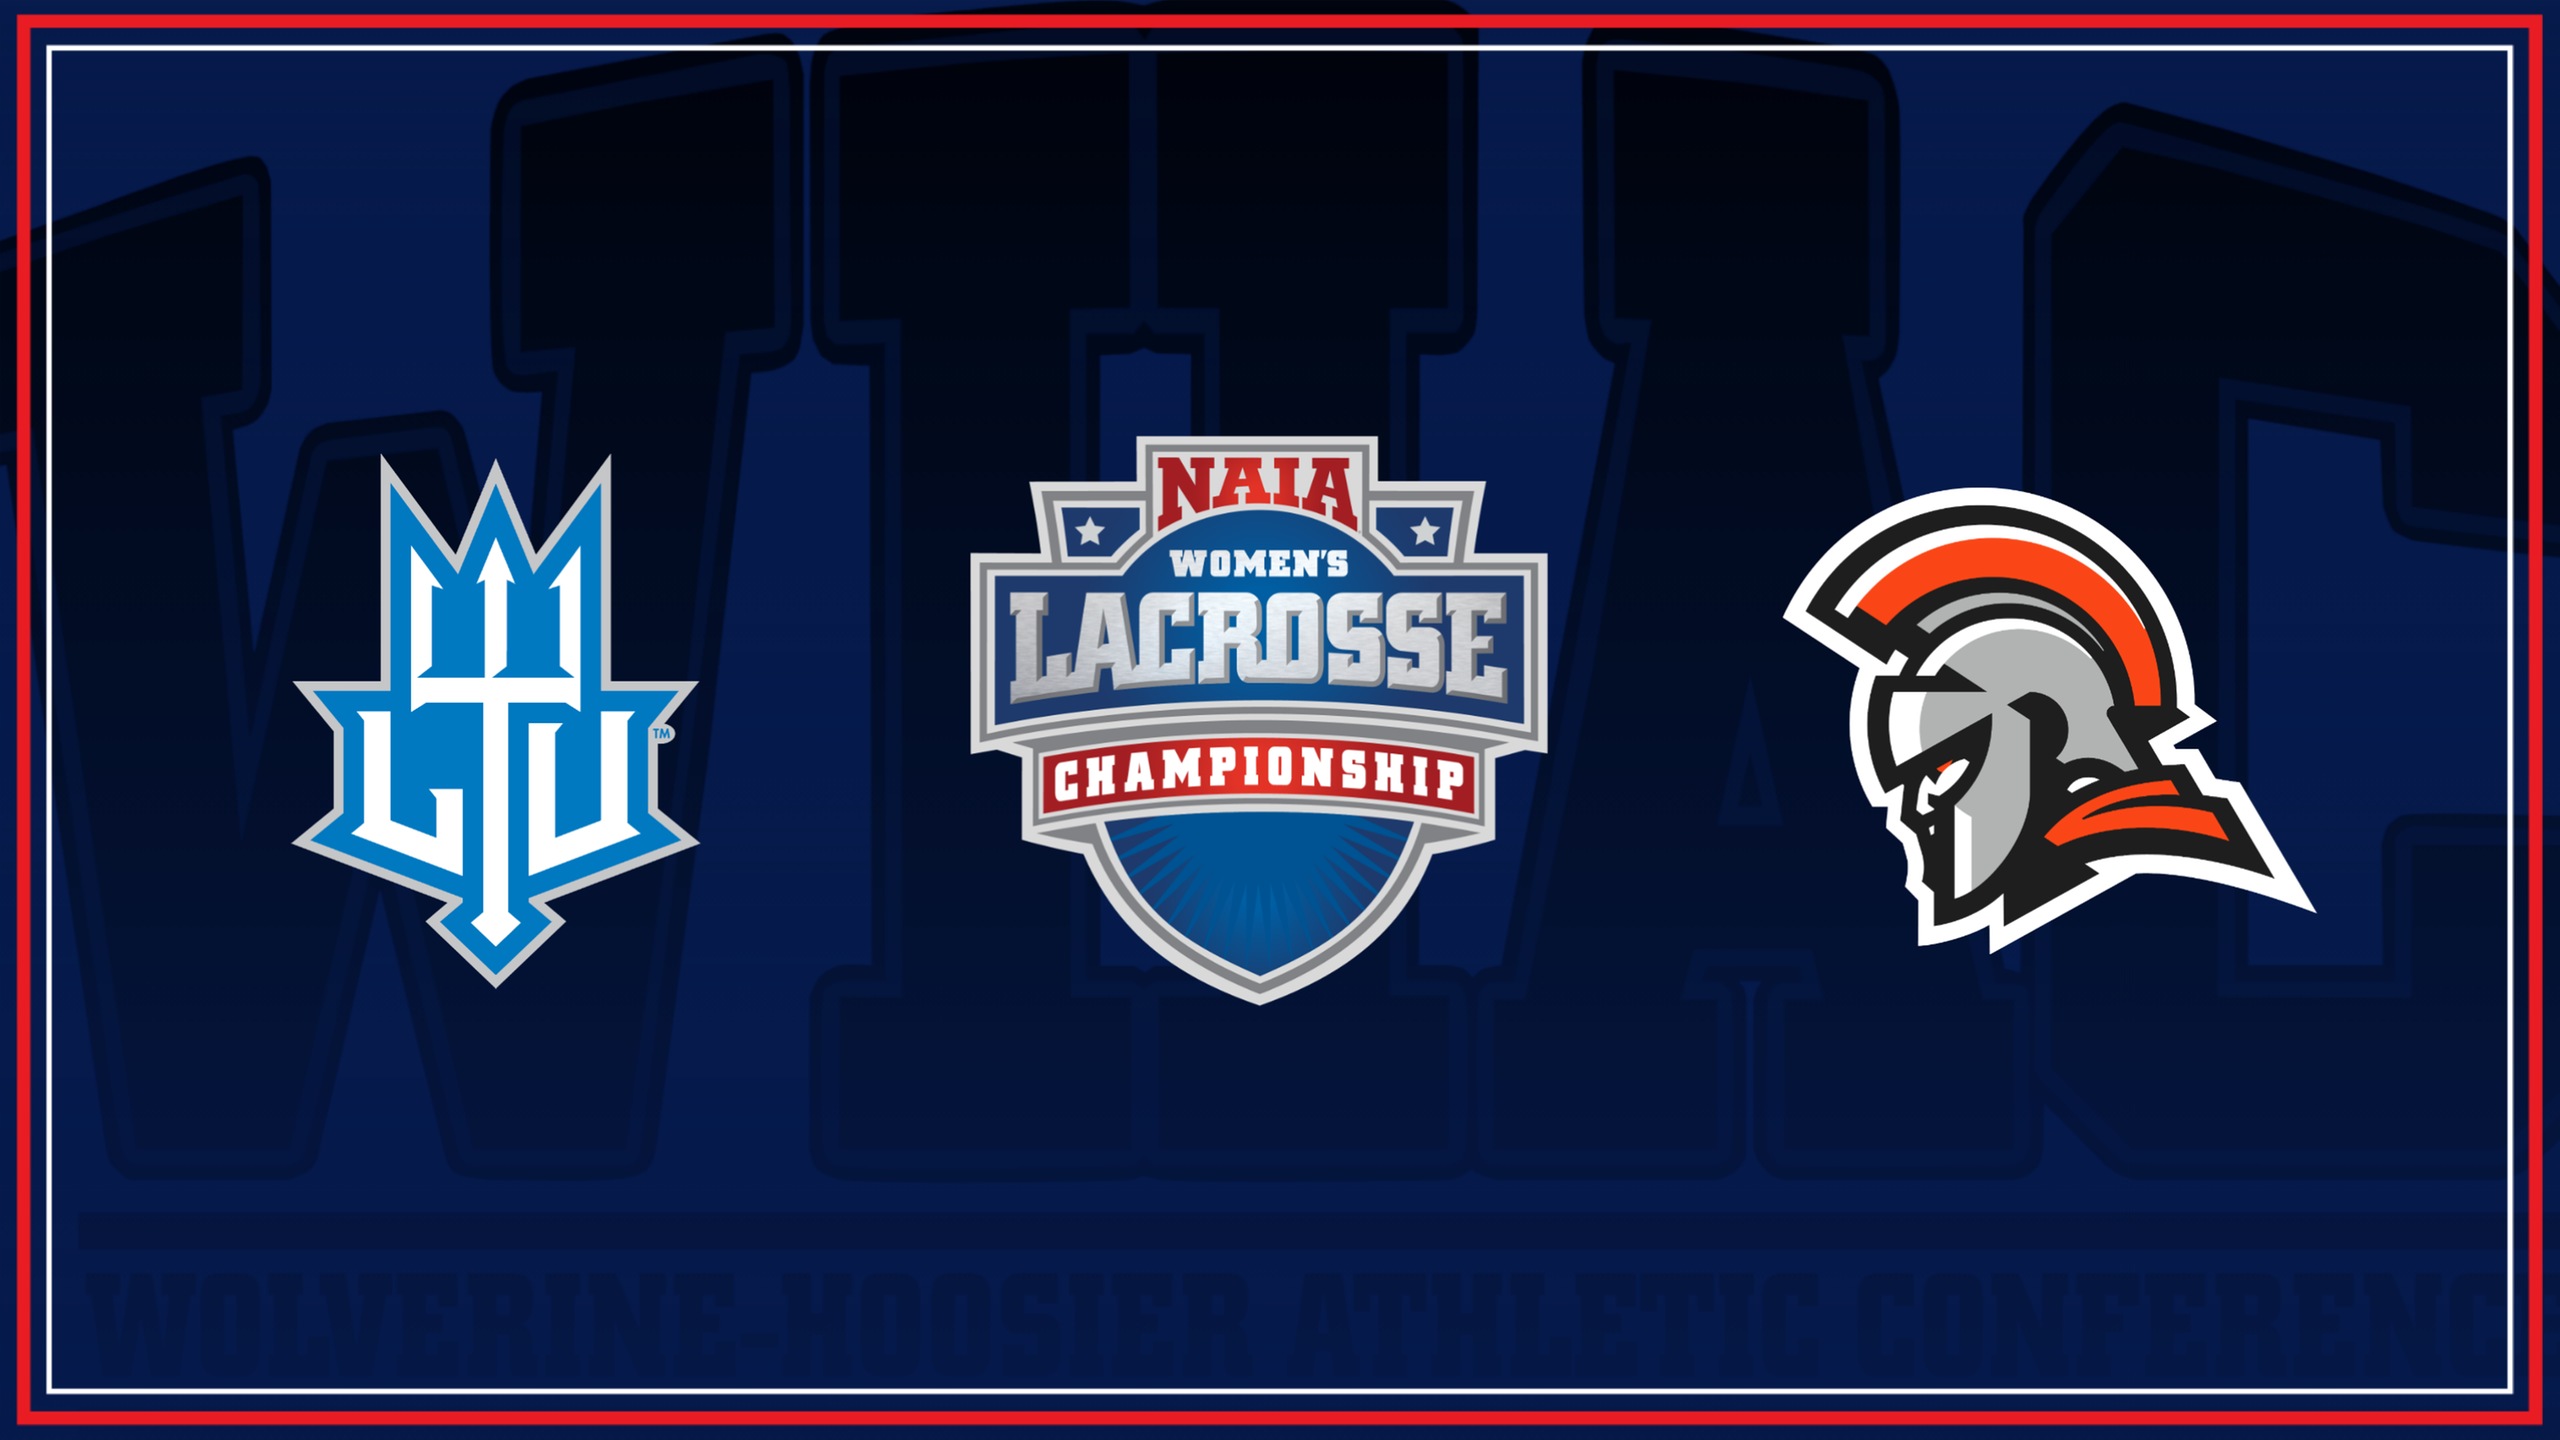 Lawrence Tech and Indiana Tech Qualify for NAIA WLAX National Championship